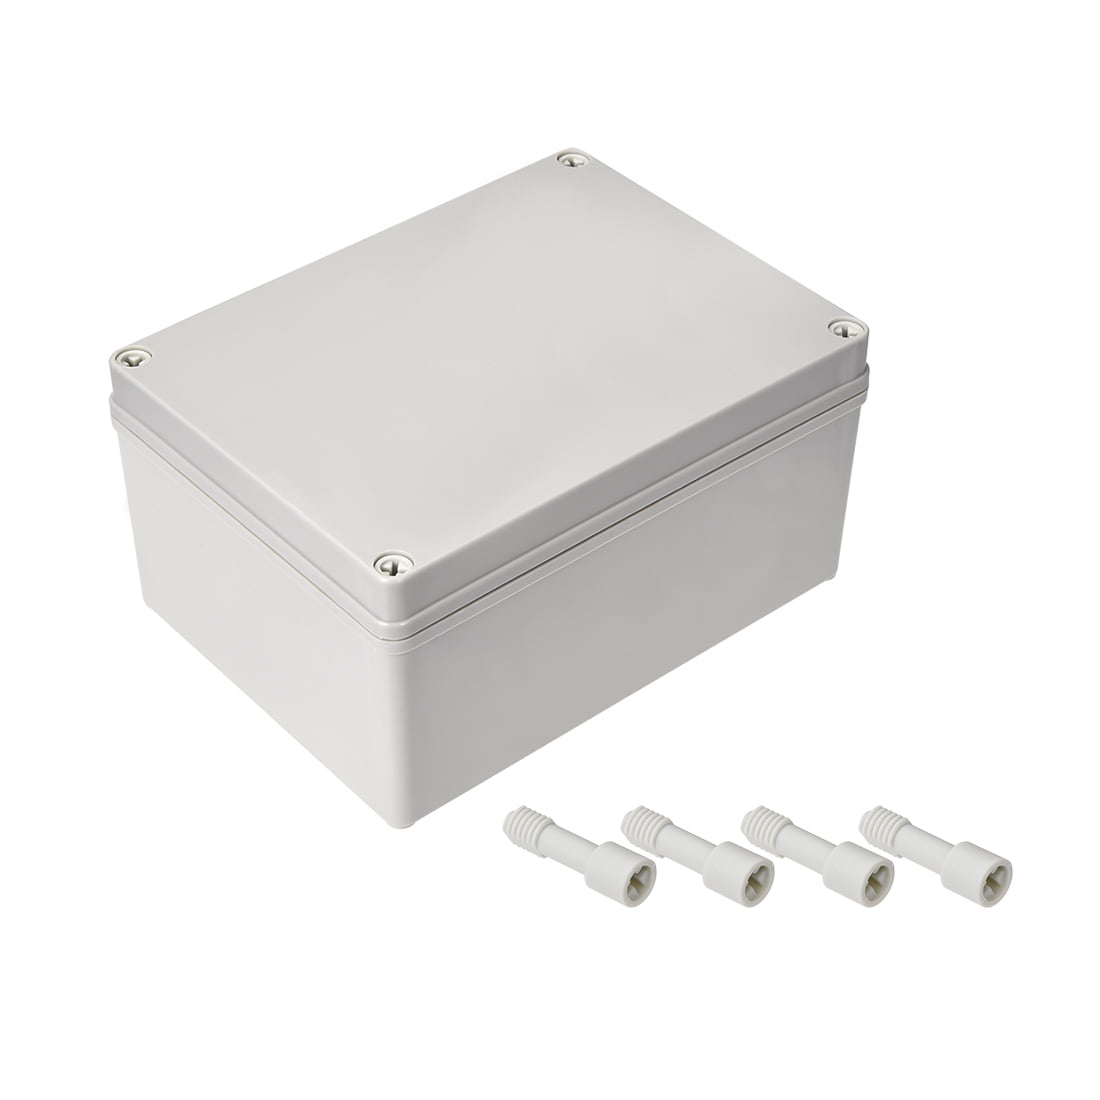 Junction Box 150mm x 200mm x 100mm ABS Enclosure Outdoor Lighting Cable Electrics Connection